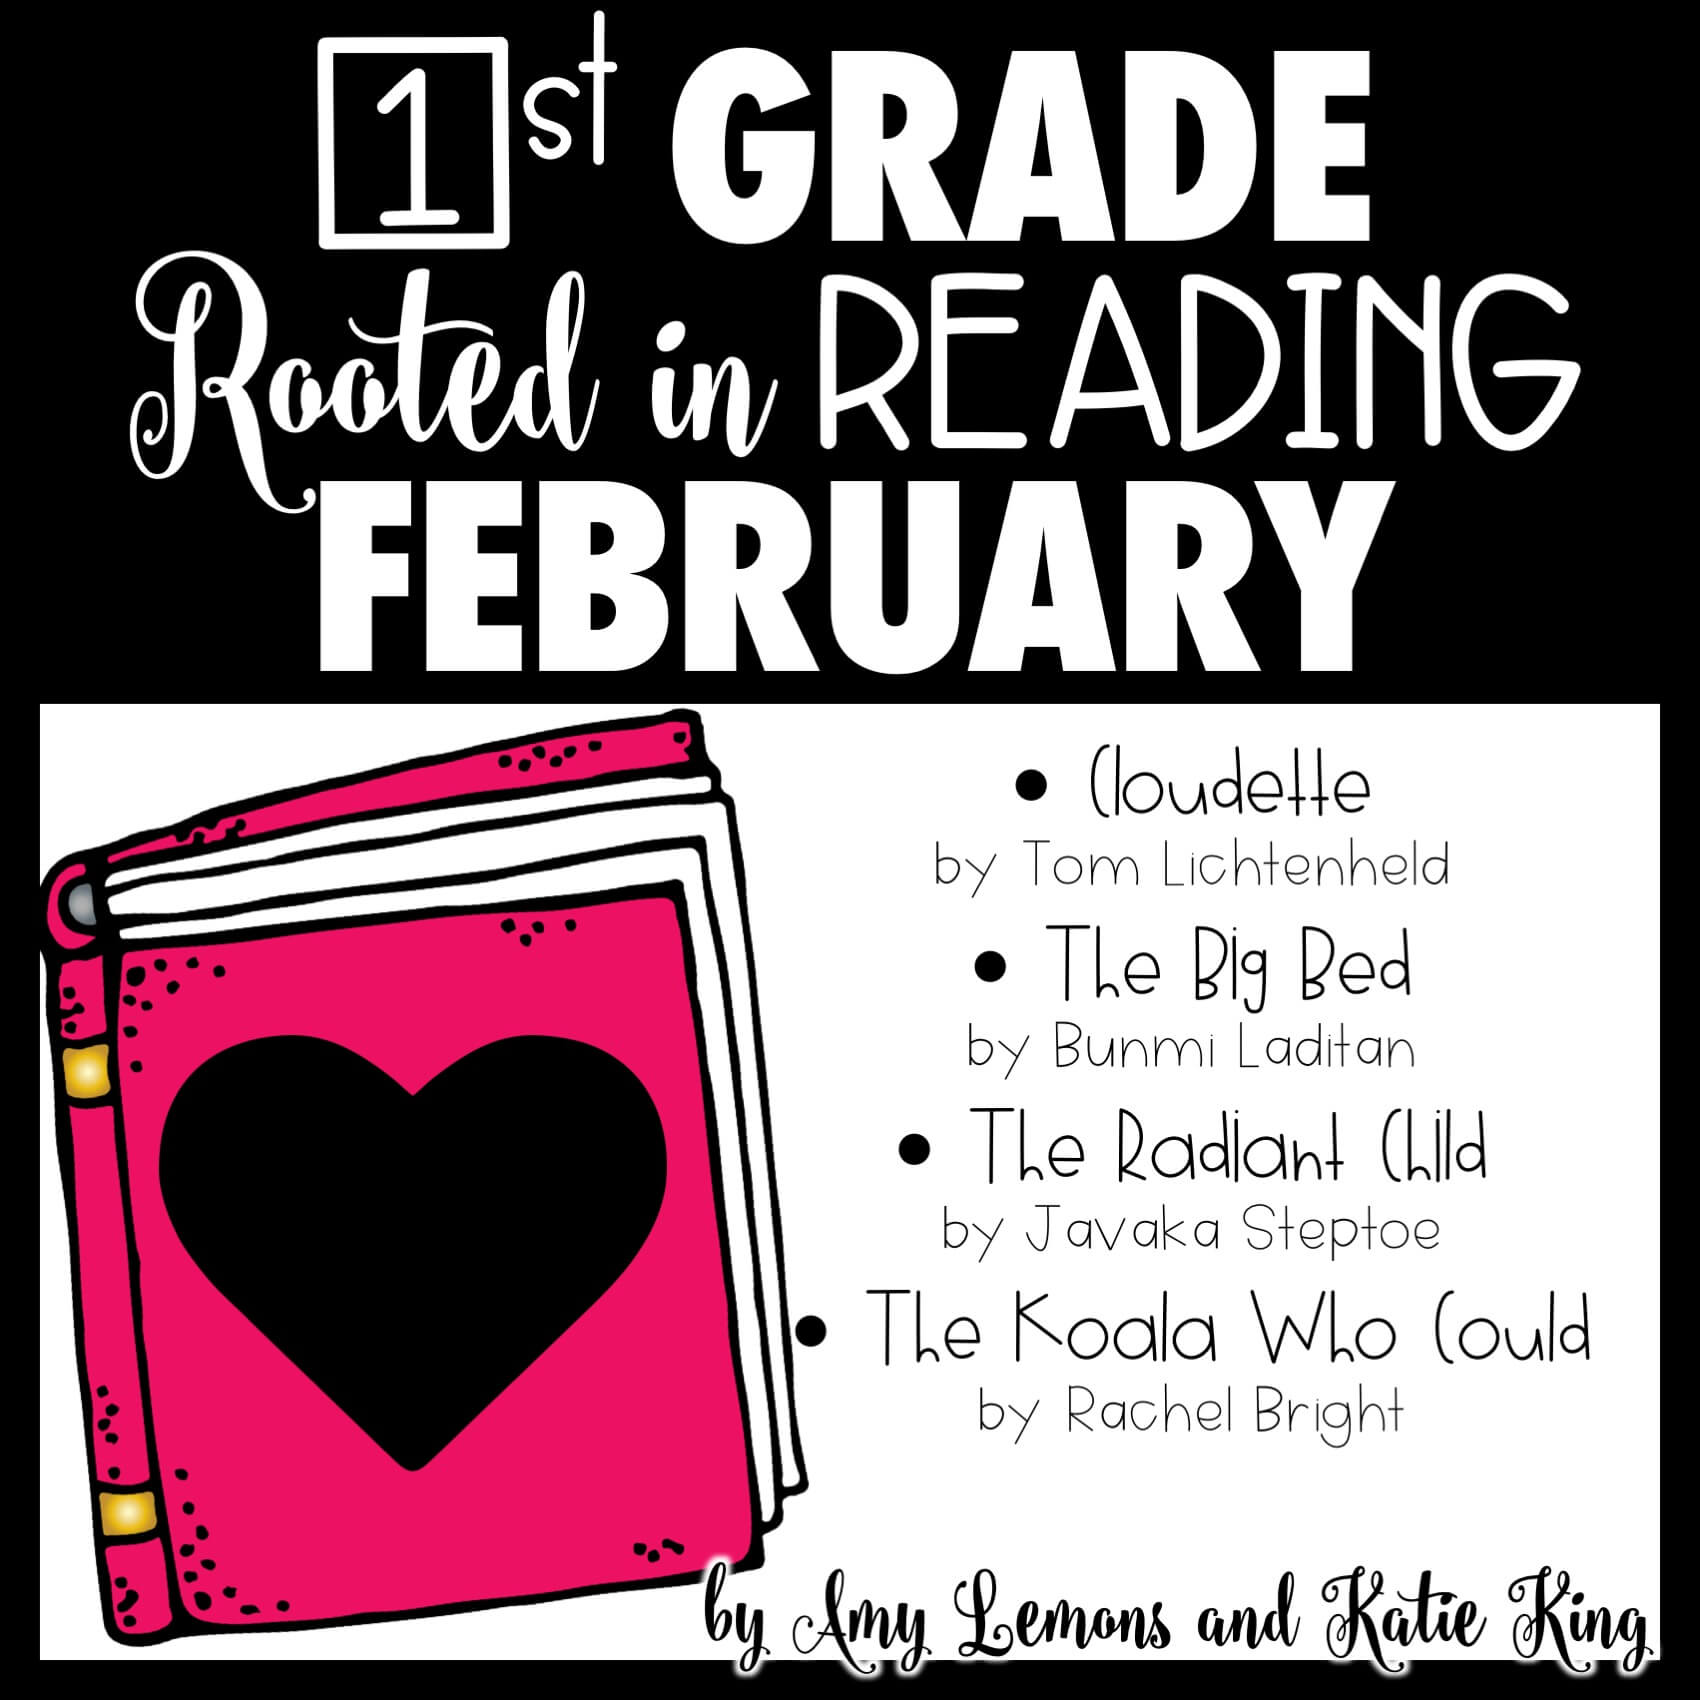 1st Grade Rooted in Reading February